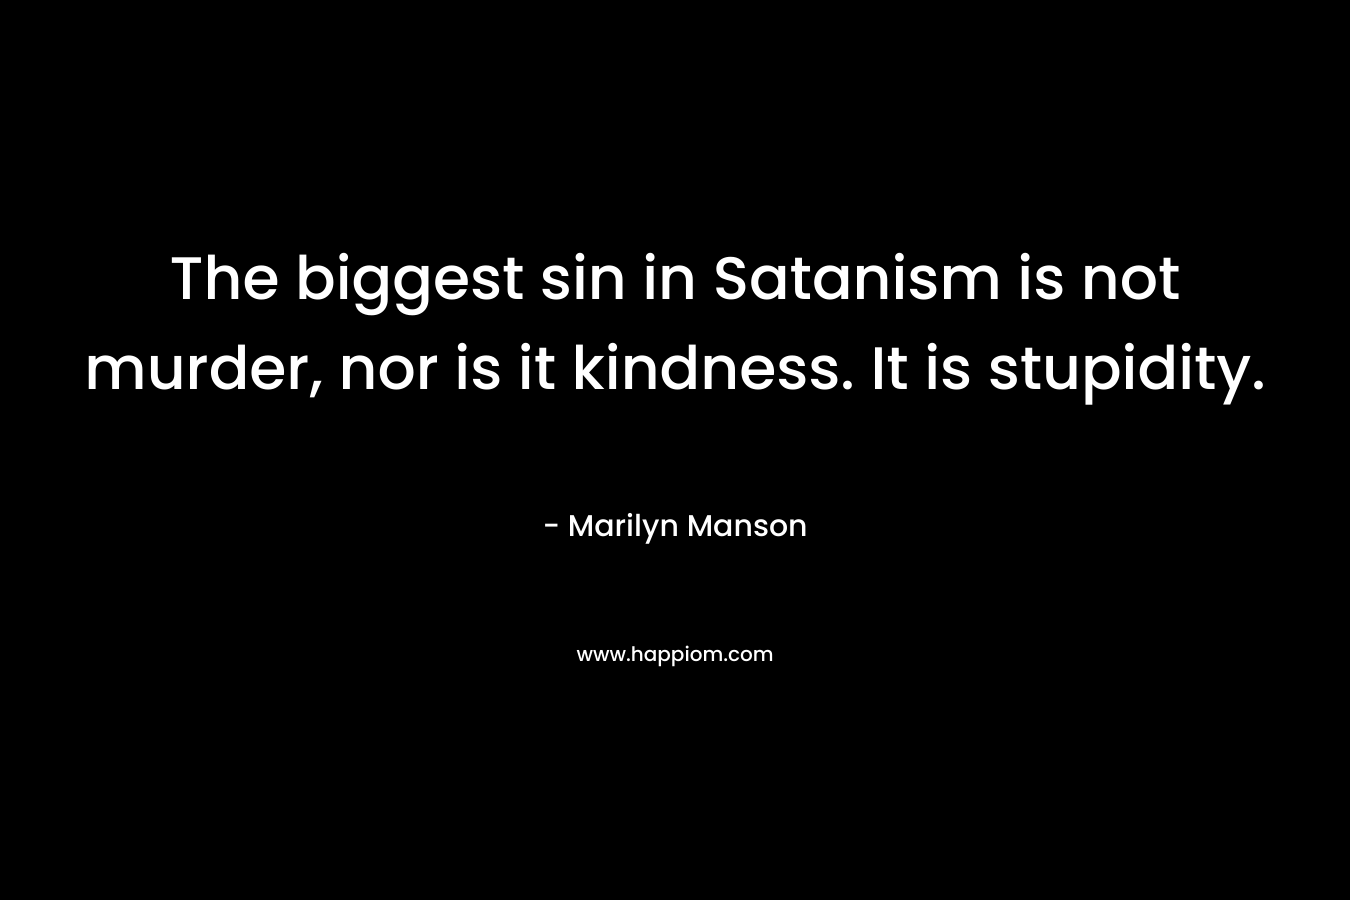 The biggest sin in Satanism is not murder, nor is it kindness. It is stupidity. – Marilyn Manson